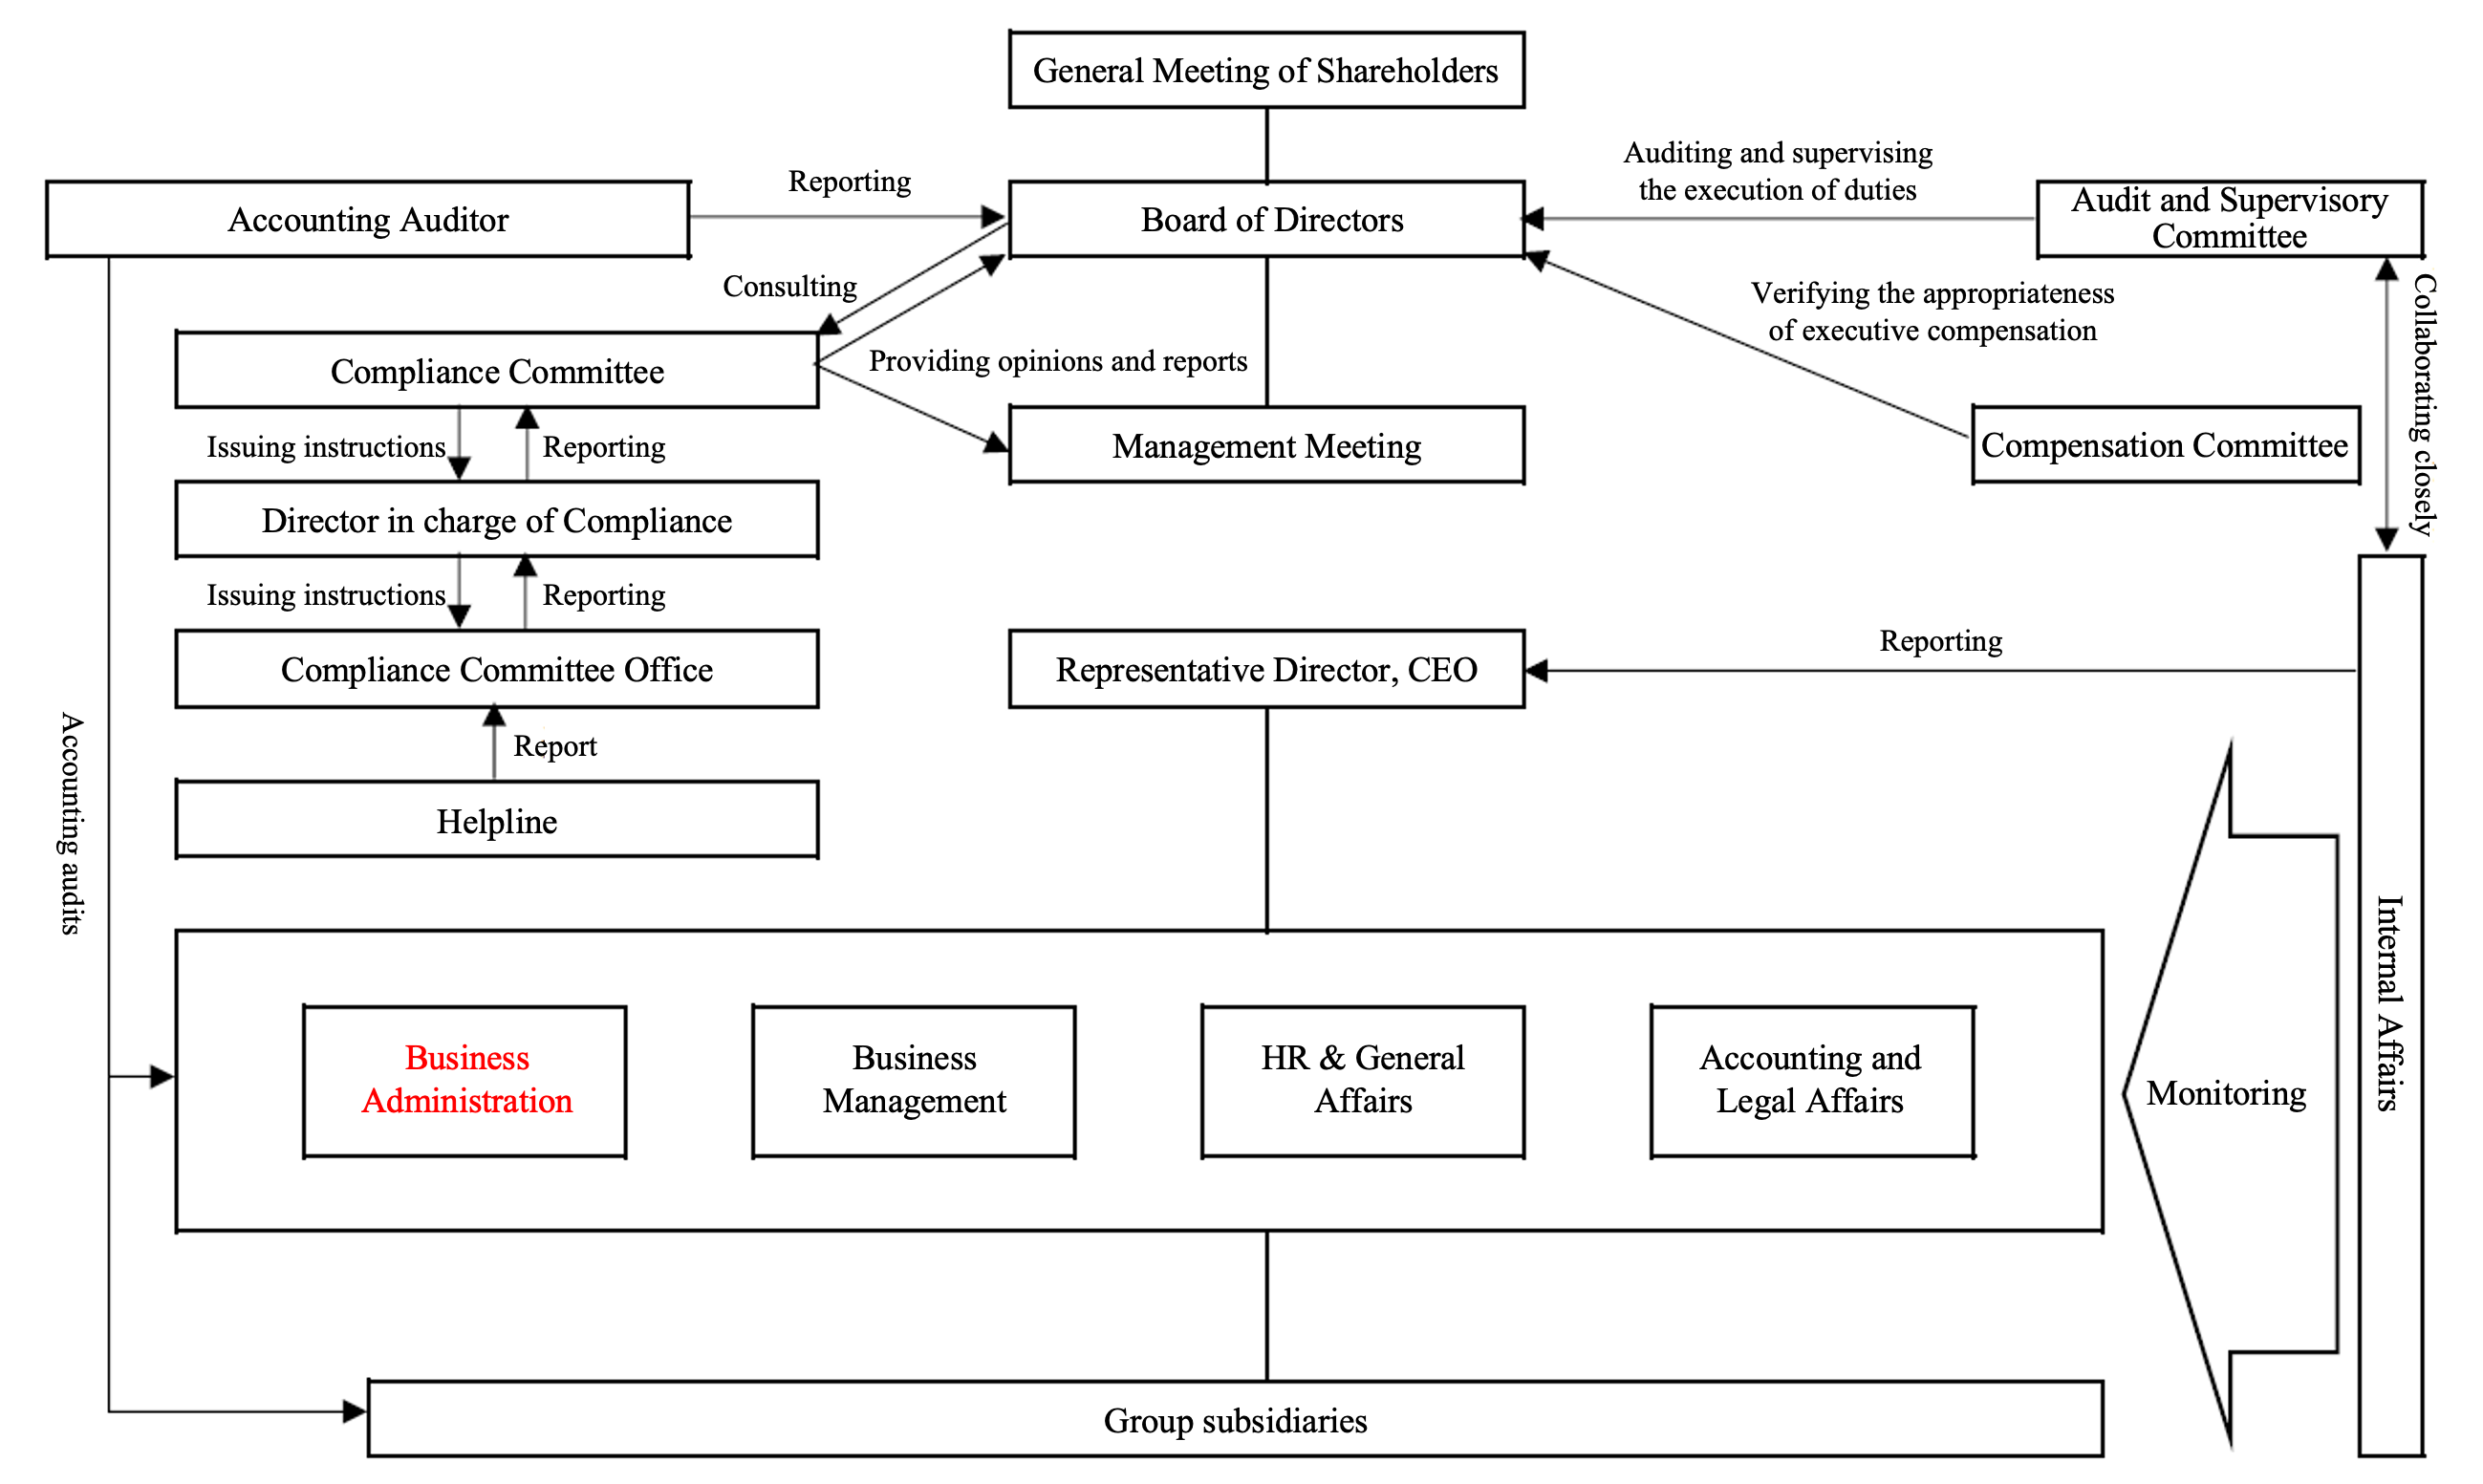 Structure of corporate governance units and internal control system